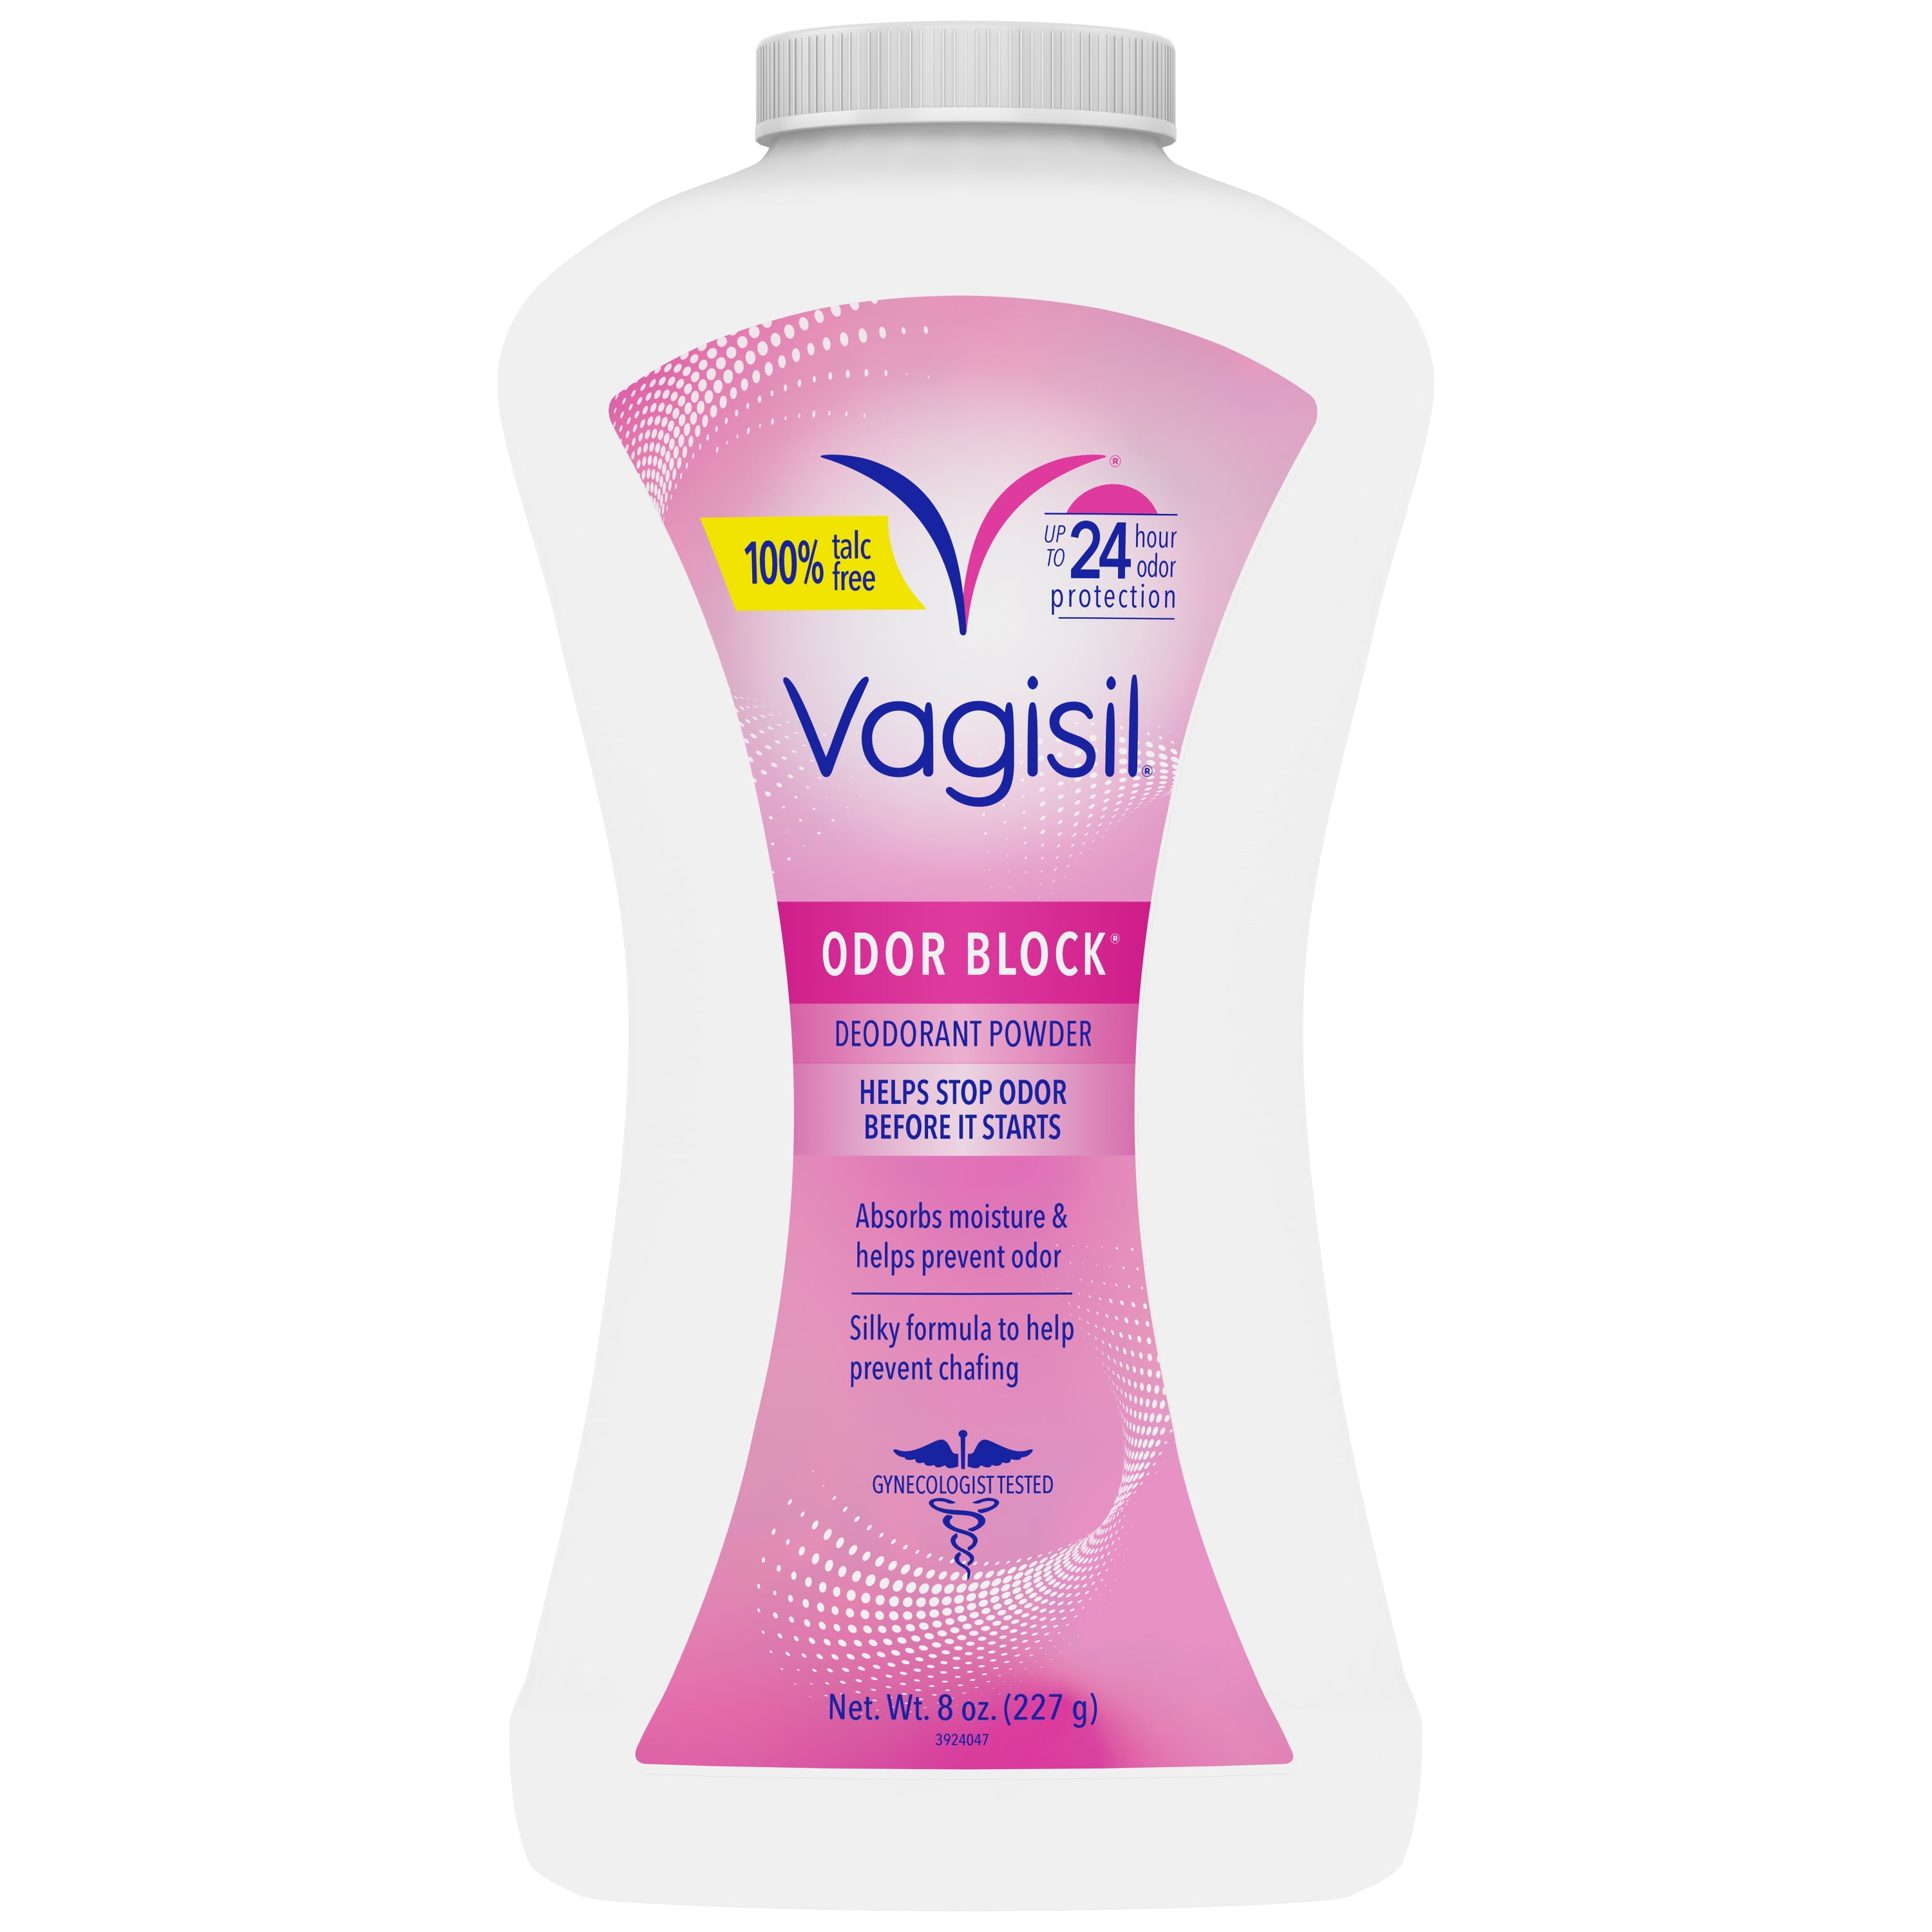 Vagisil Daily Intimate Deodorant Powder, With Odor Block Protection, Talc-Free, 8 oz